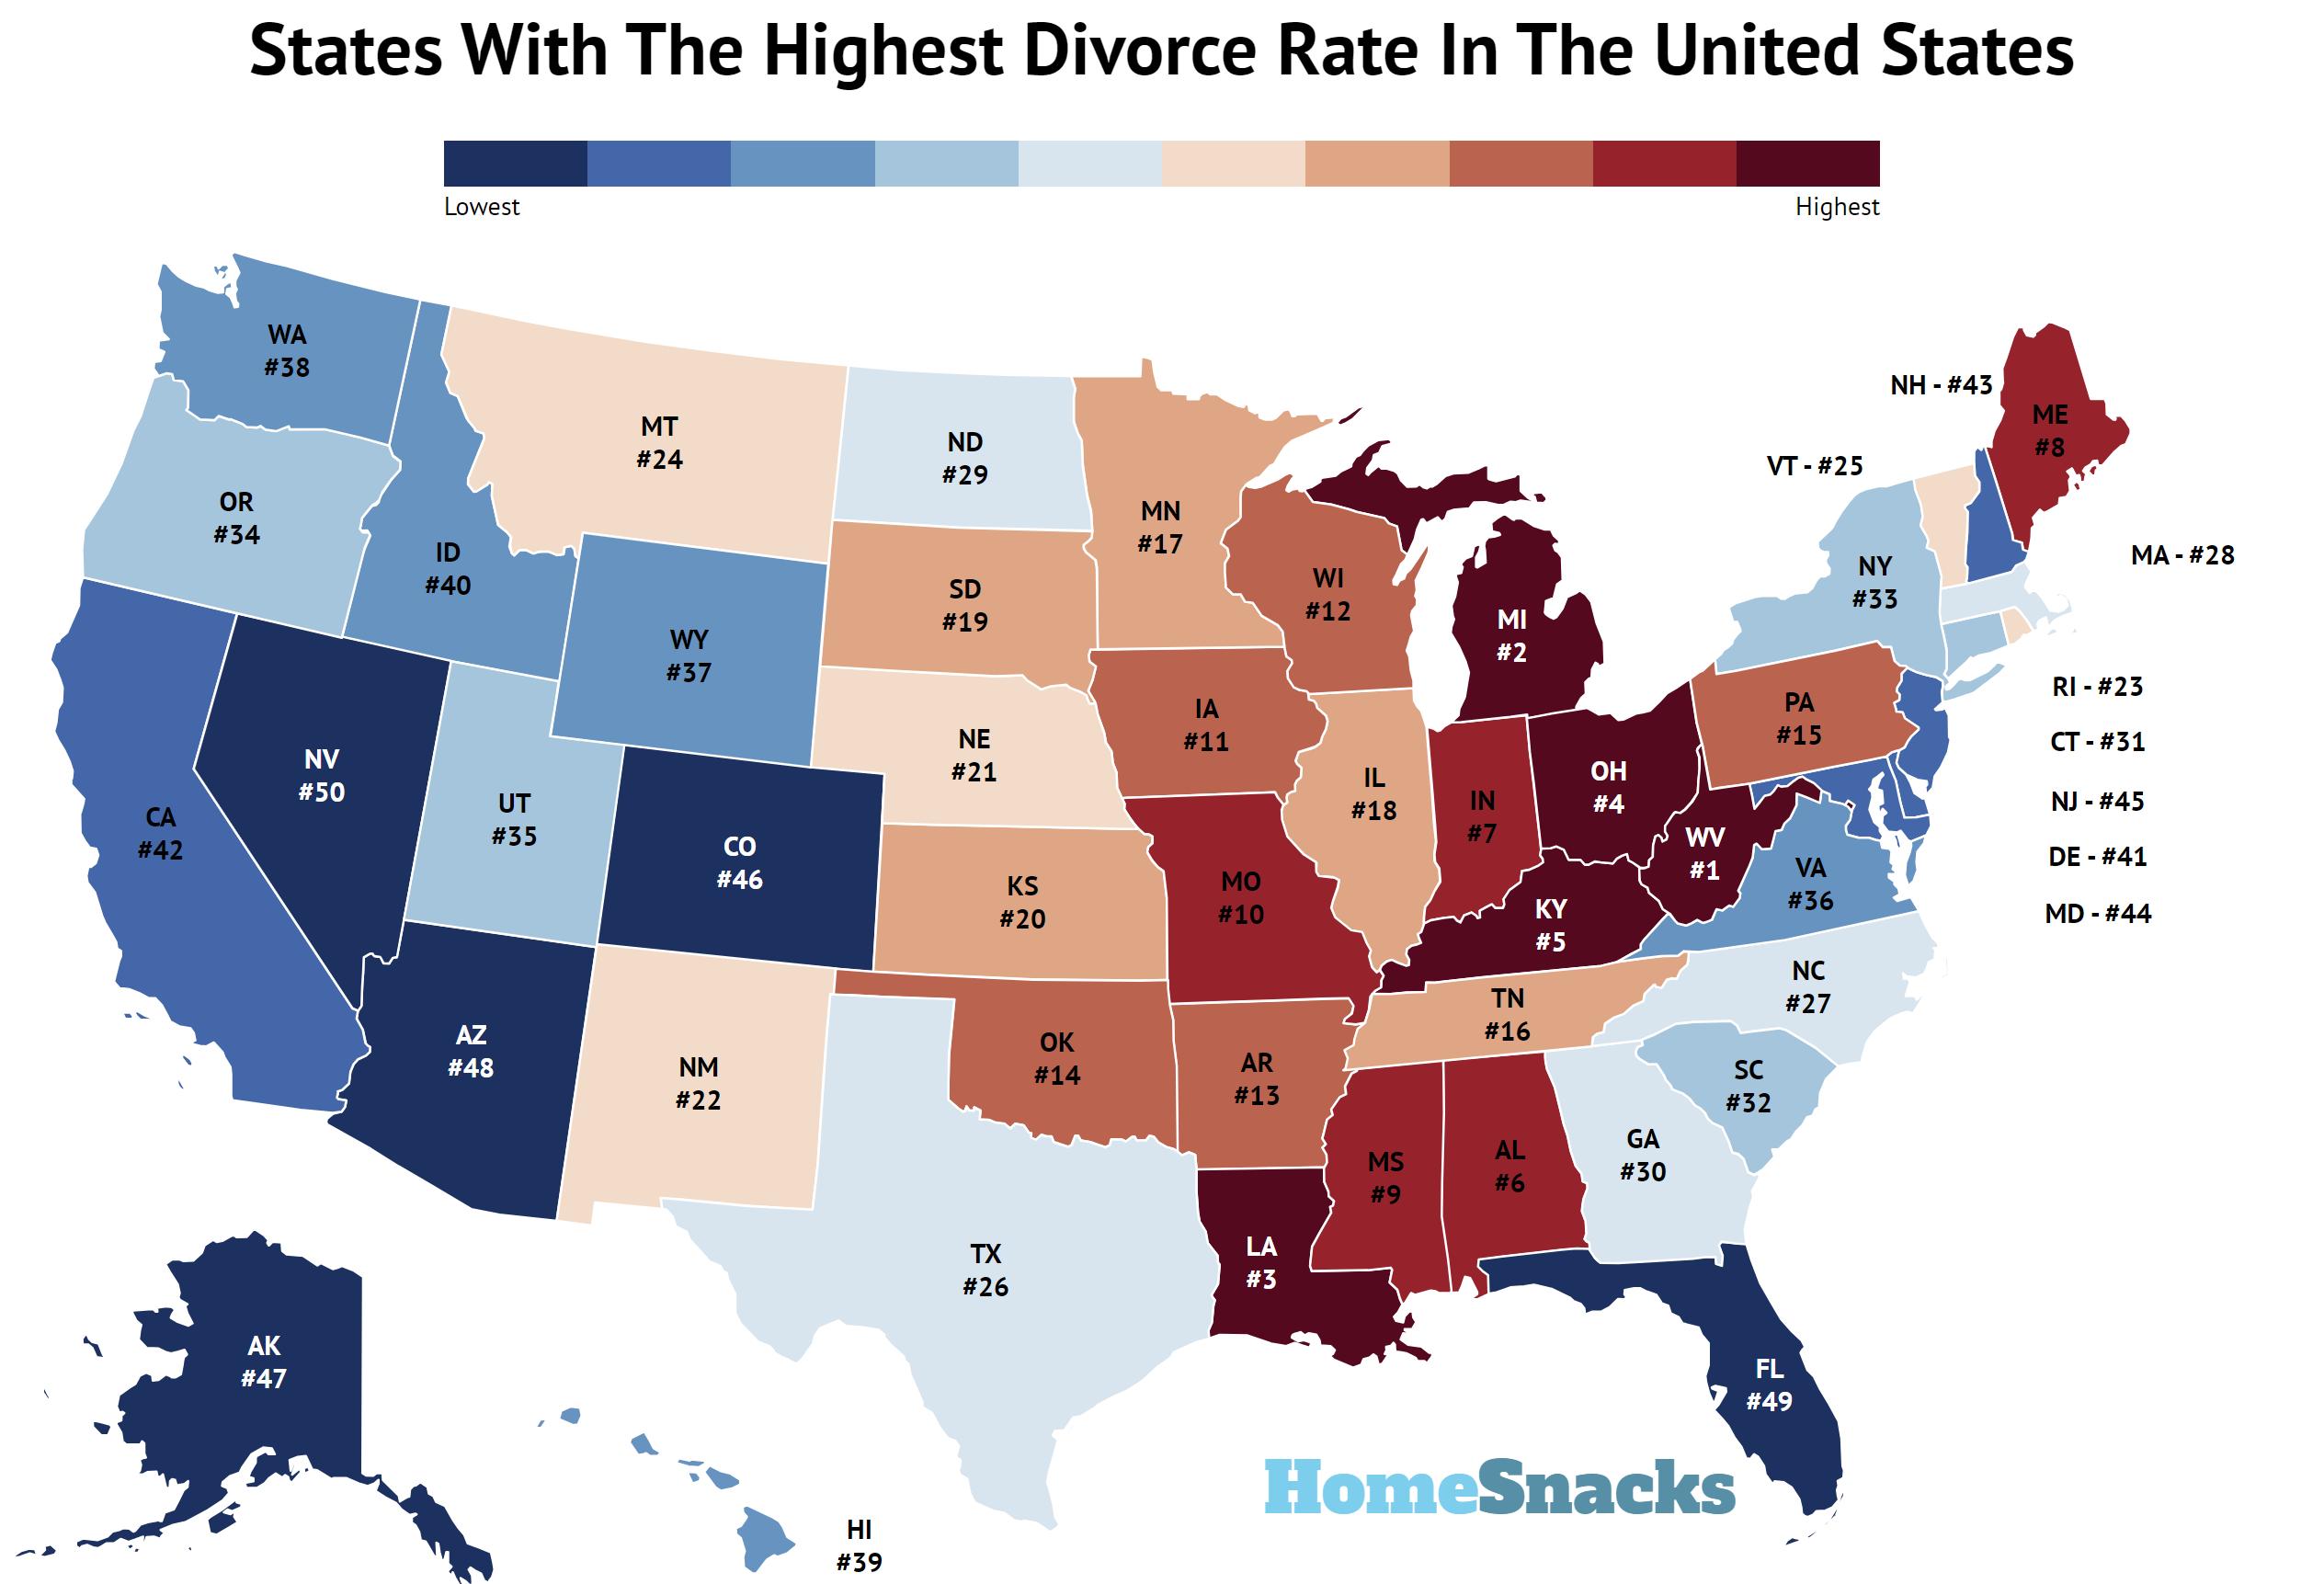 States With The Highest Divorce Rate In The United States